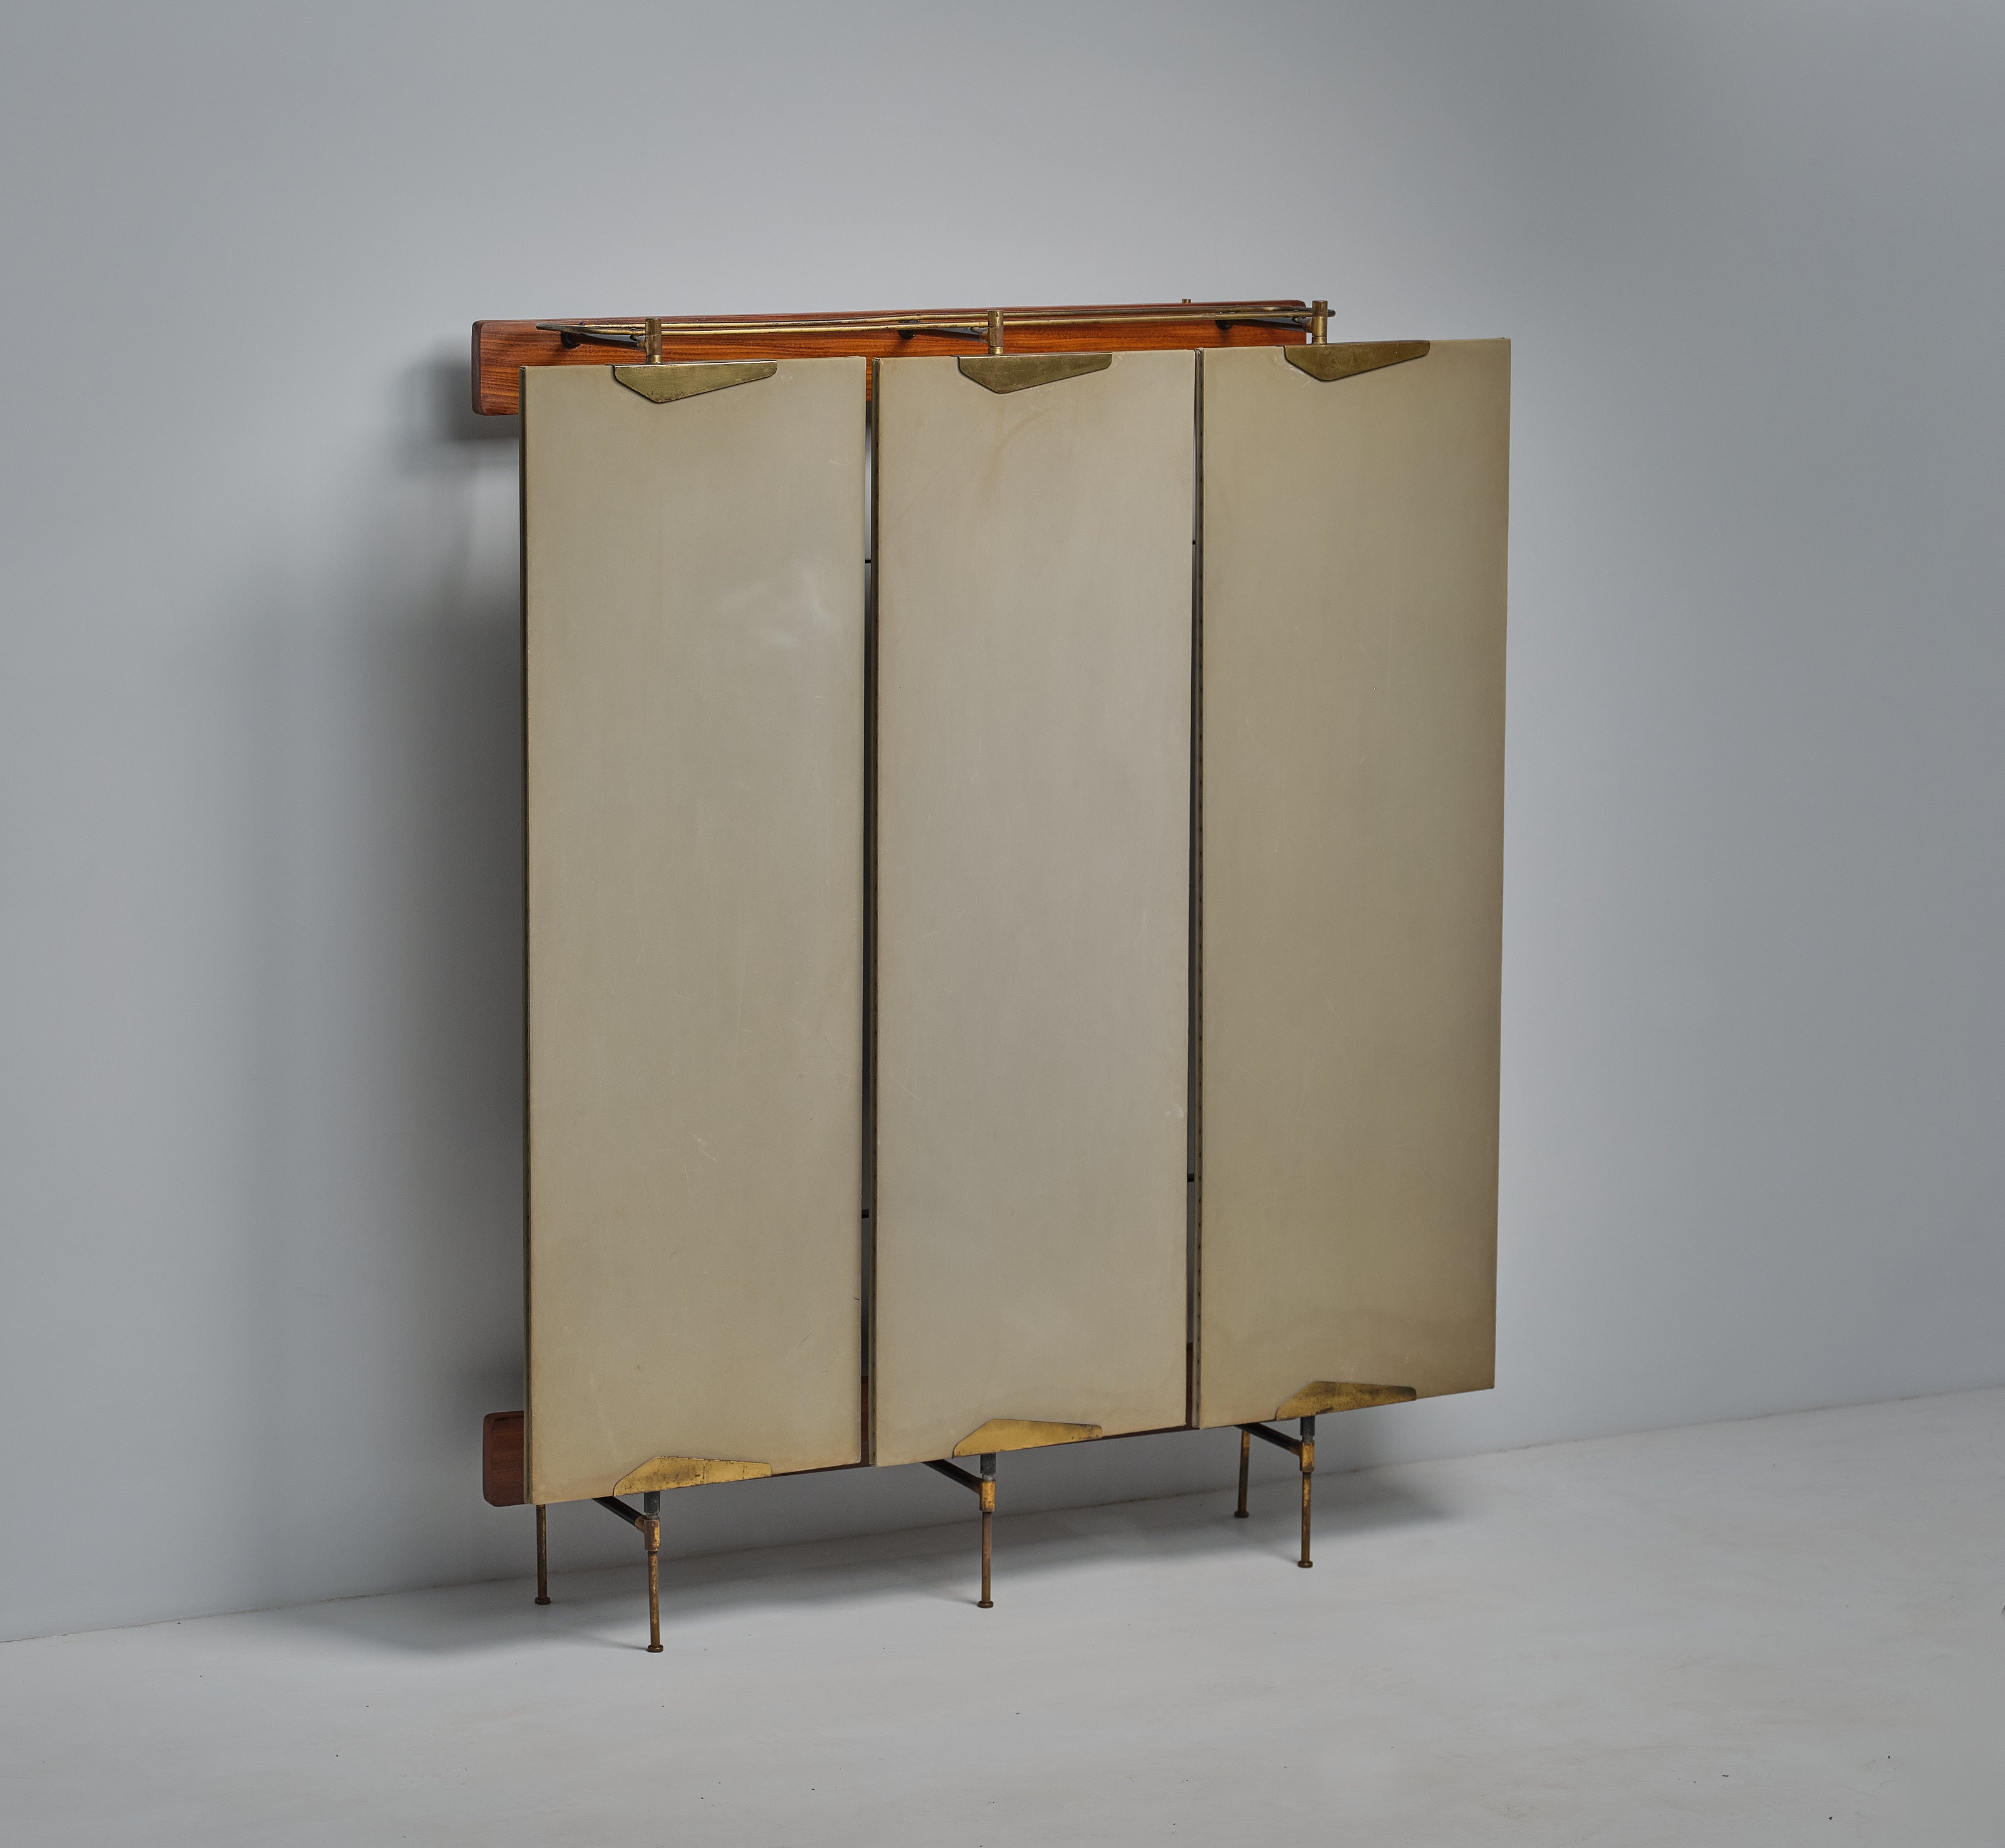 Introducing a masterpiece of Italian craftsmanship from the high-end production of the 1950s: a stunning wardrobe that seamlessly combines modern design with a light and airy aesthetic. This exceptional piece features three swiveling doors with a